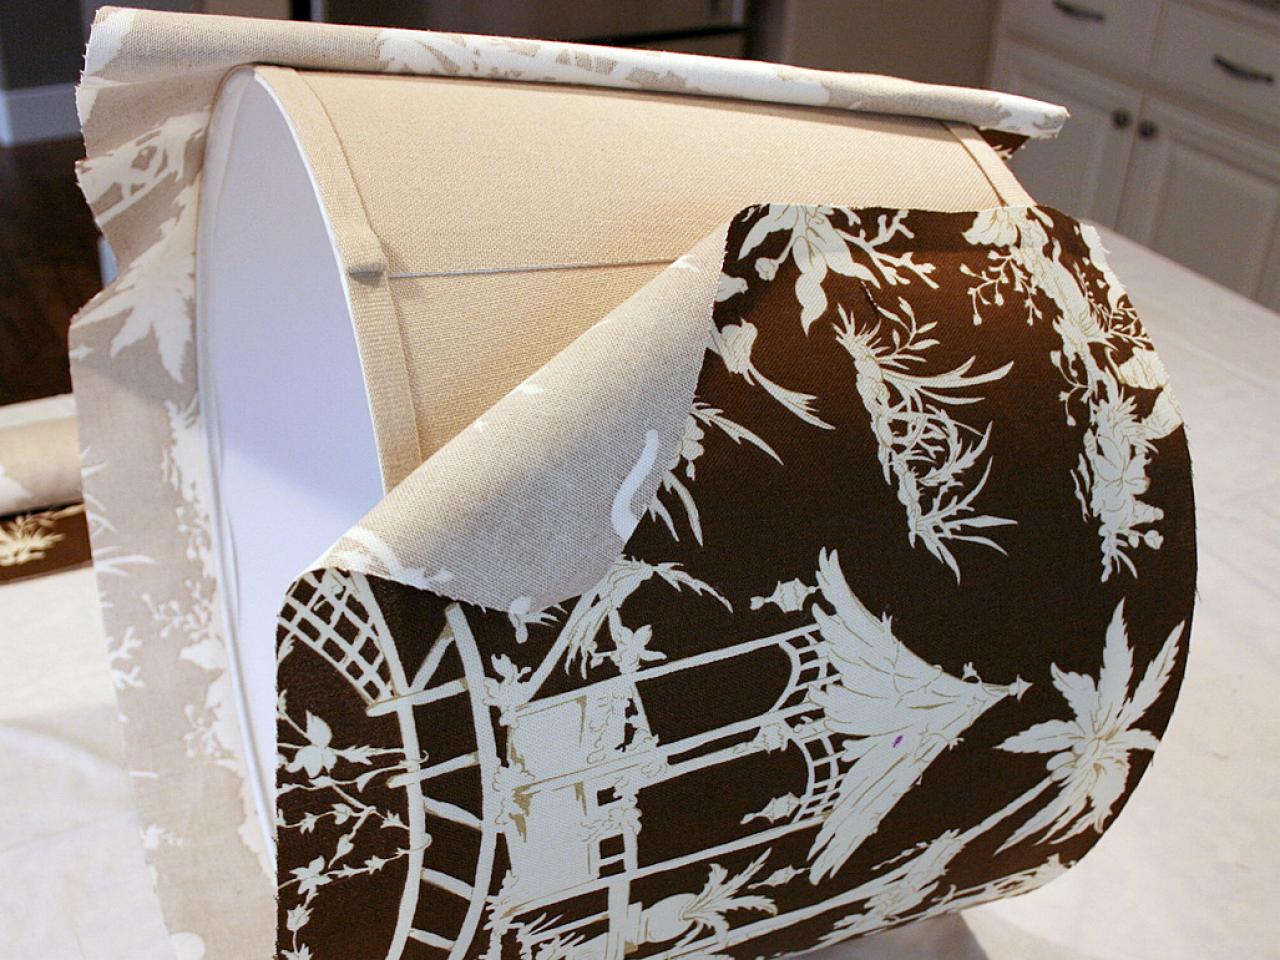 Custom Fabric Covered Lampshade, Can You Use Any Fabric To Make A Lampshade